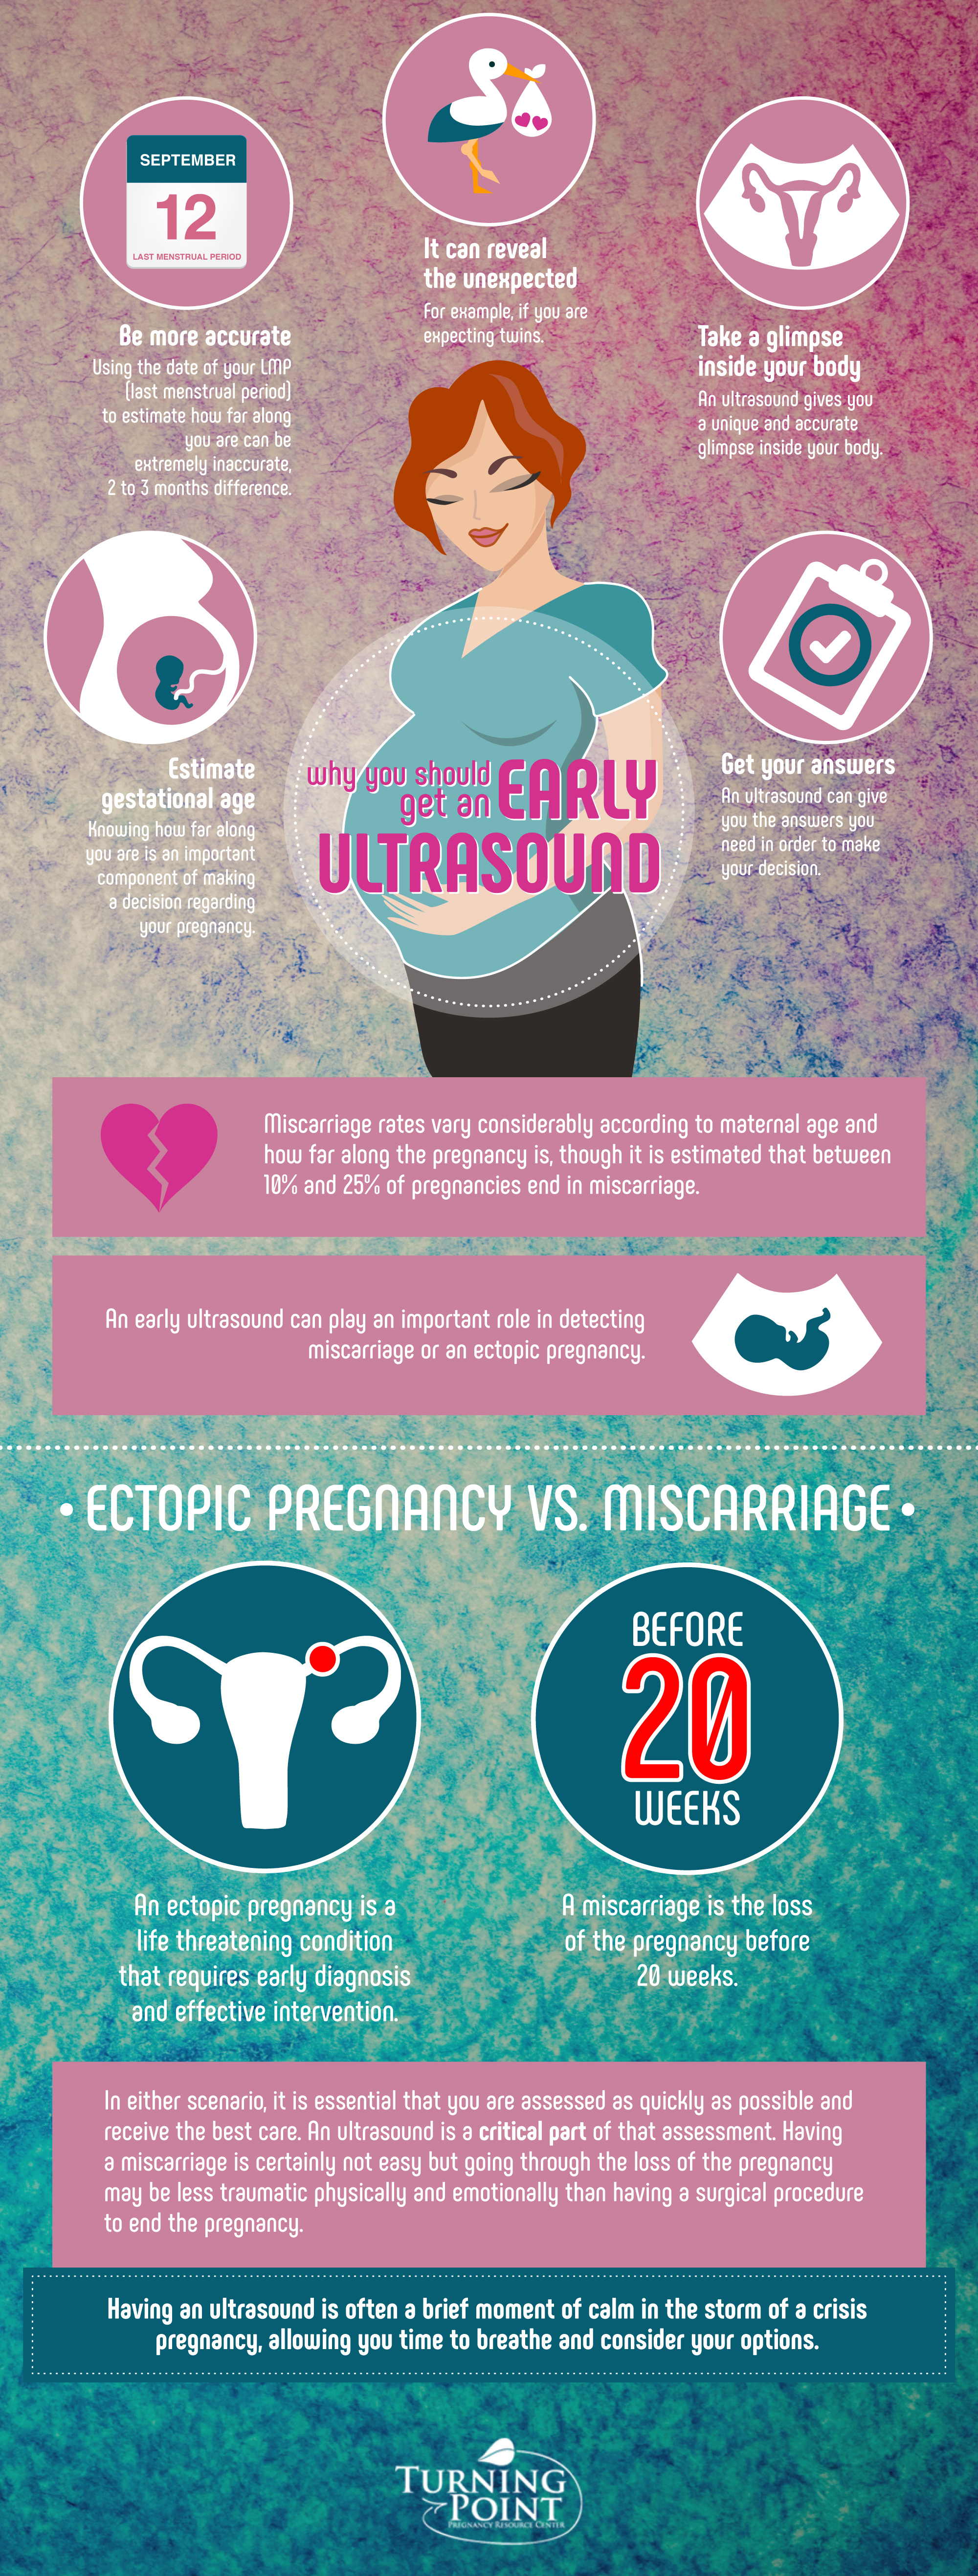 turning point ultrasound infographic | Stay at Home Mum.com.au